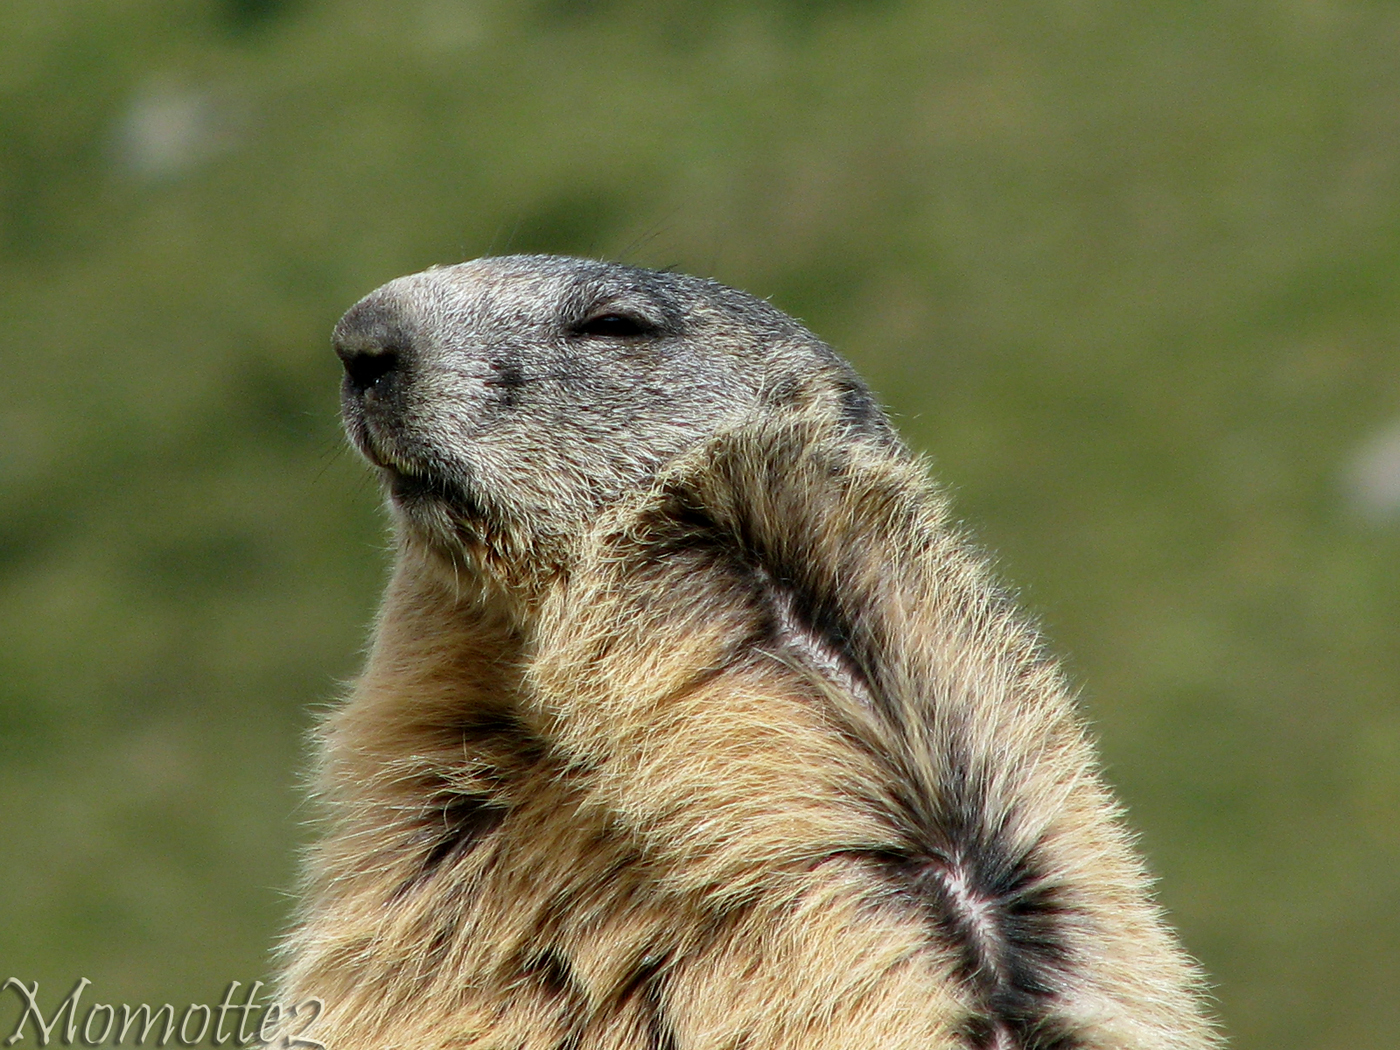 Groundhog Day In The Wind By Momotte2